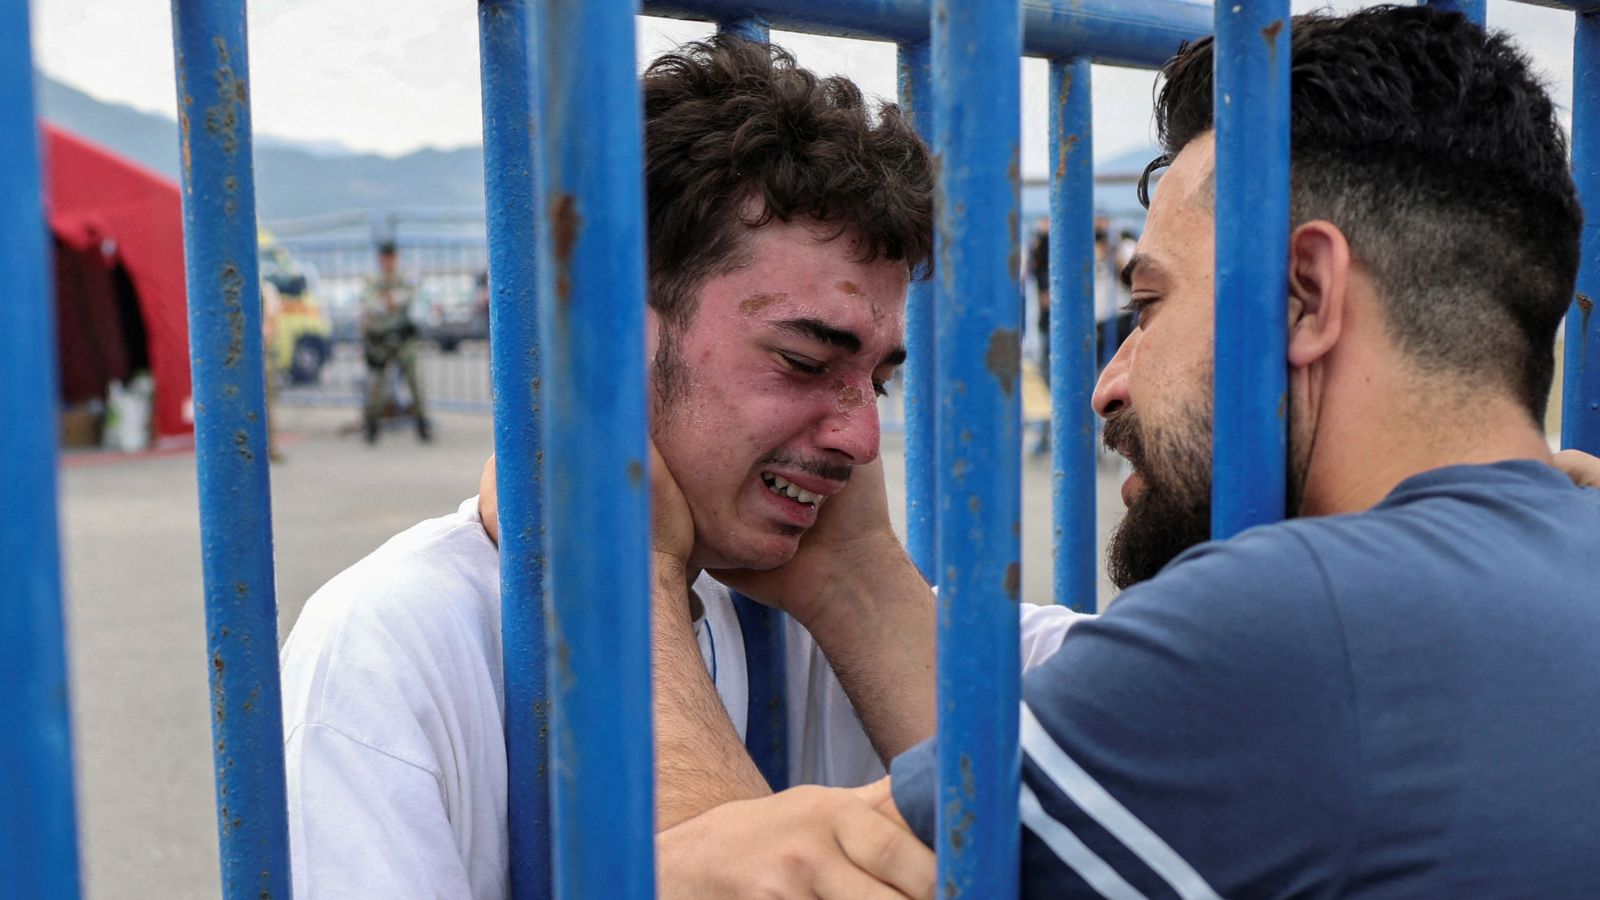 Greece migrant boat disaster survivor has emotional reunion with brother